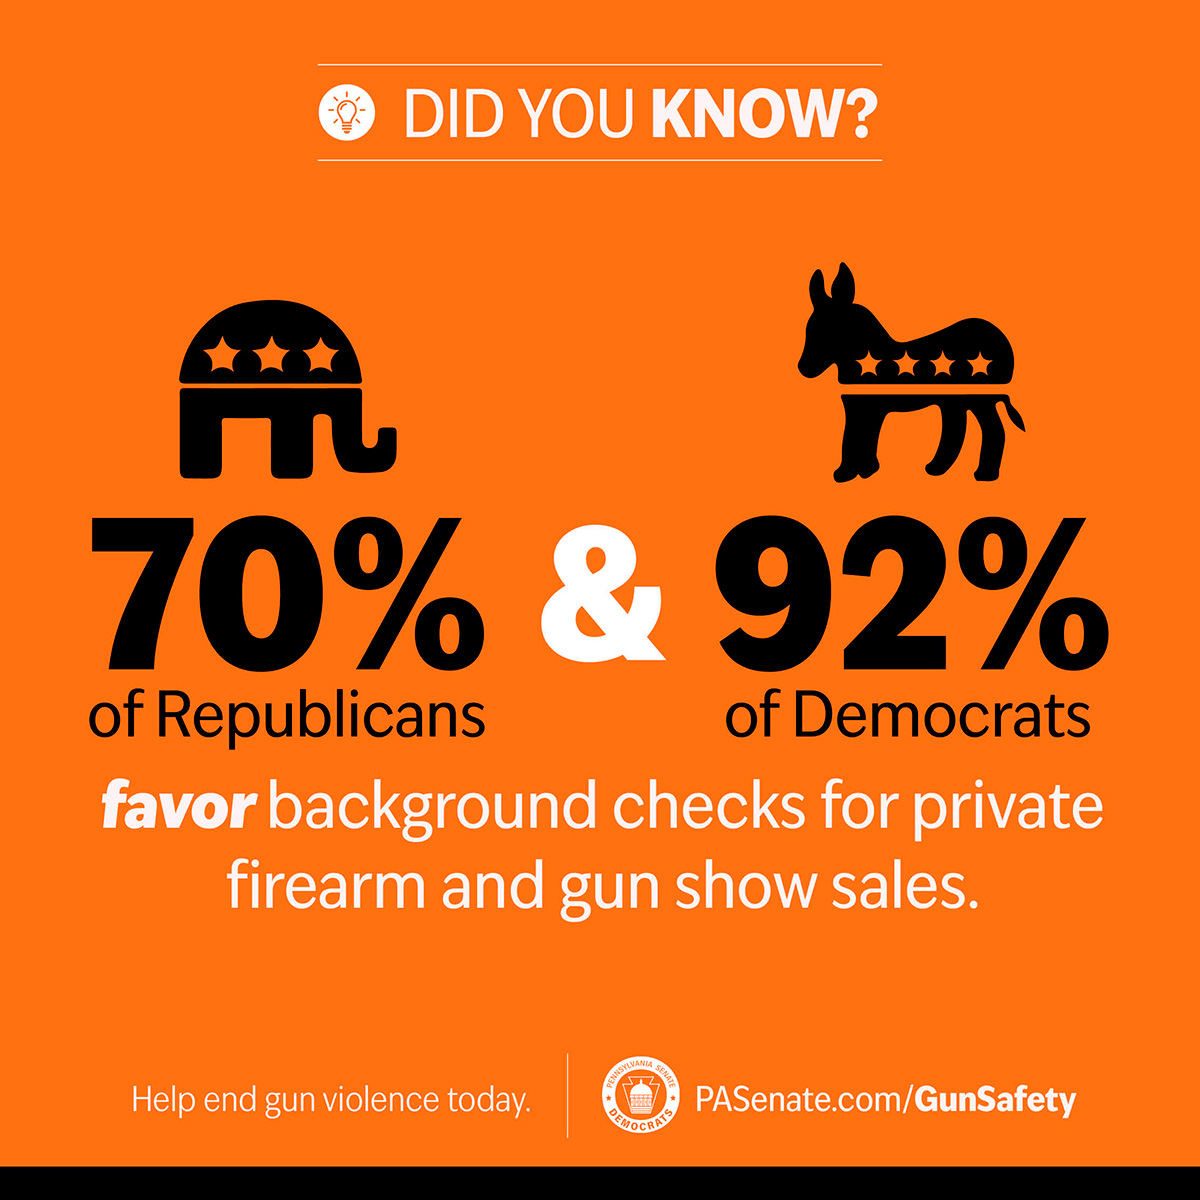 Did you know? 70% of Republicans & 92% of Democrats favor background checks for private firearm and gun show sales.